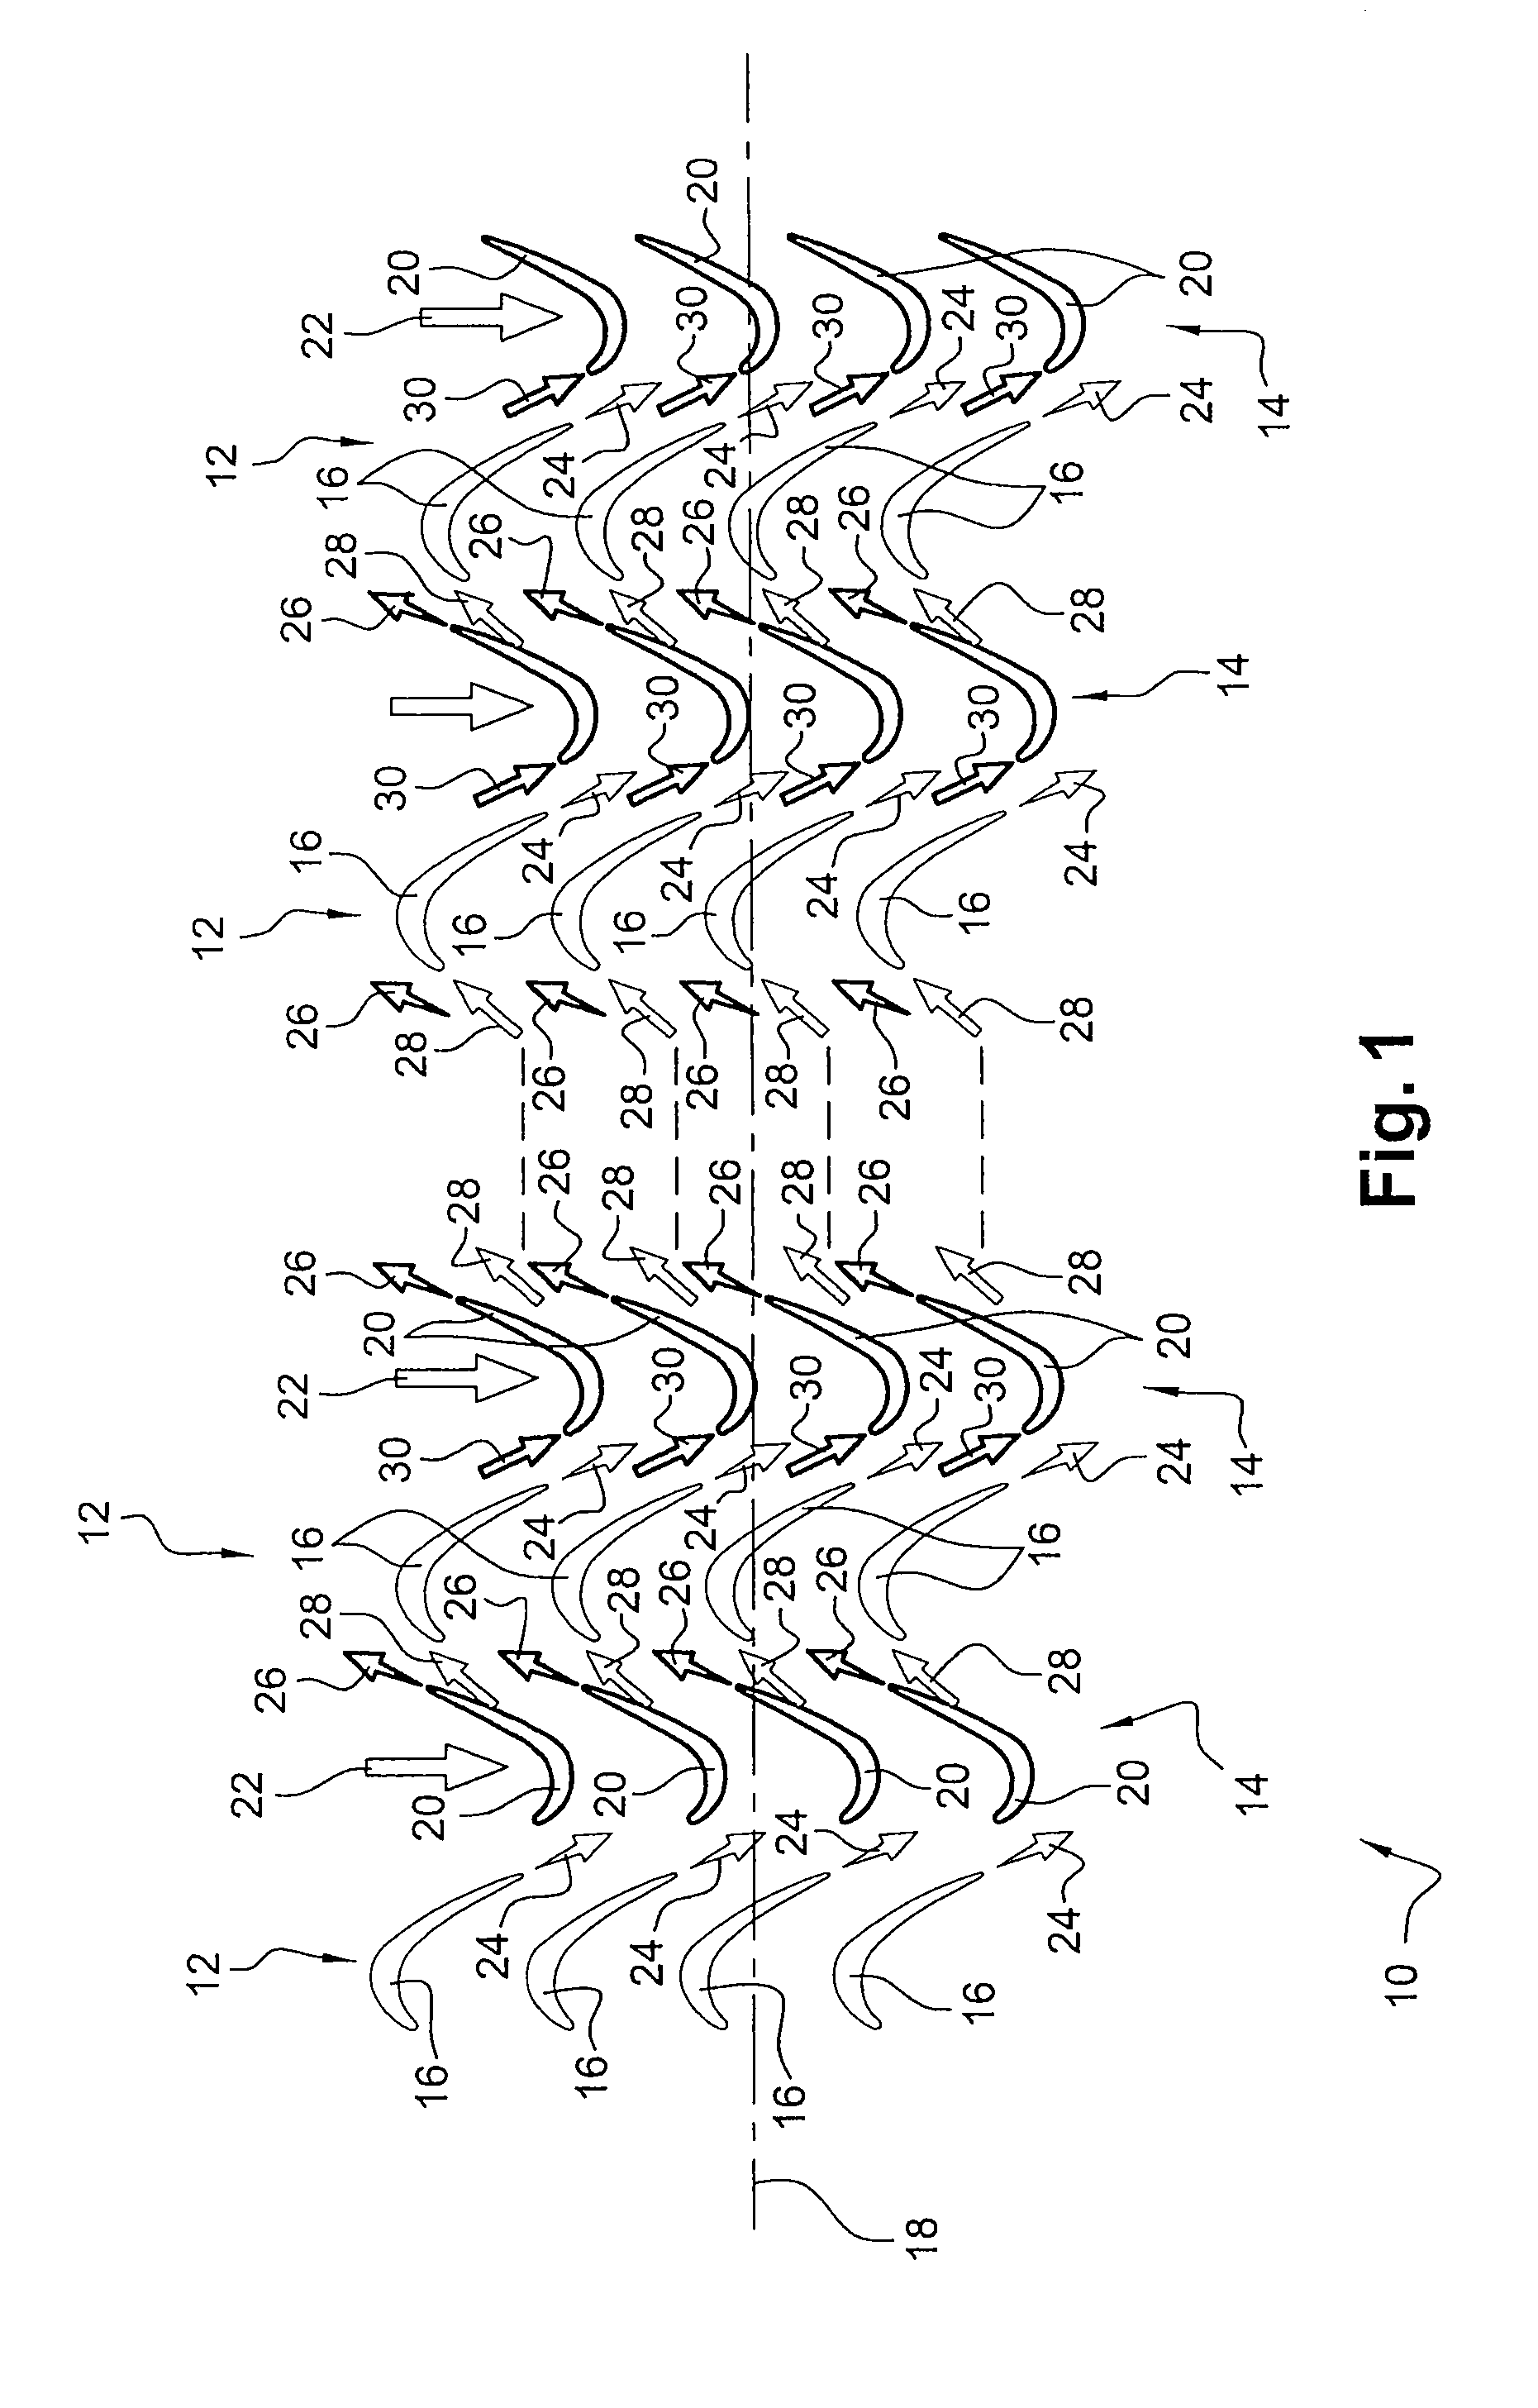 Method of designing a multistage turbine for a turbomachine